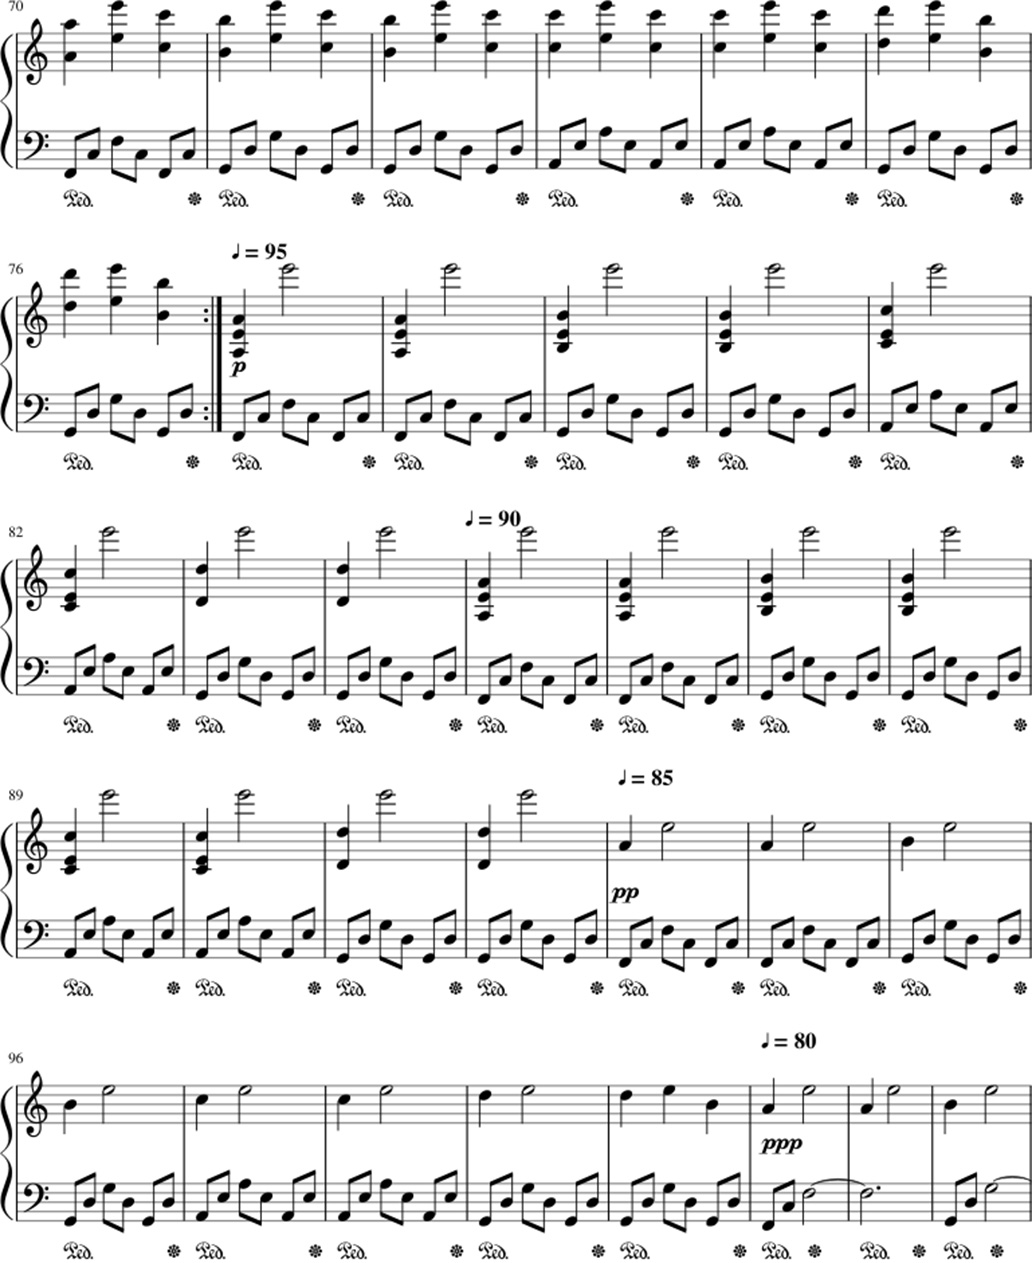 Stay sheet music notes 3